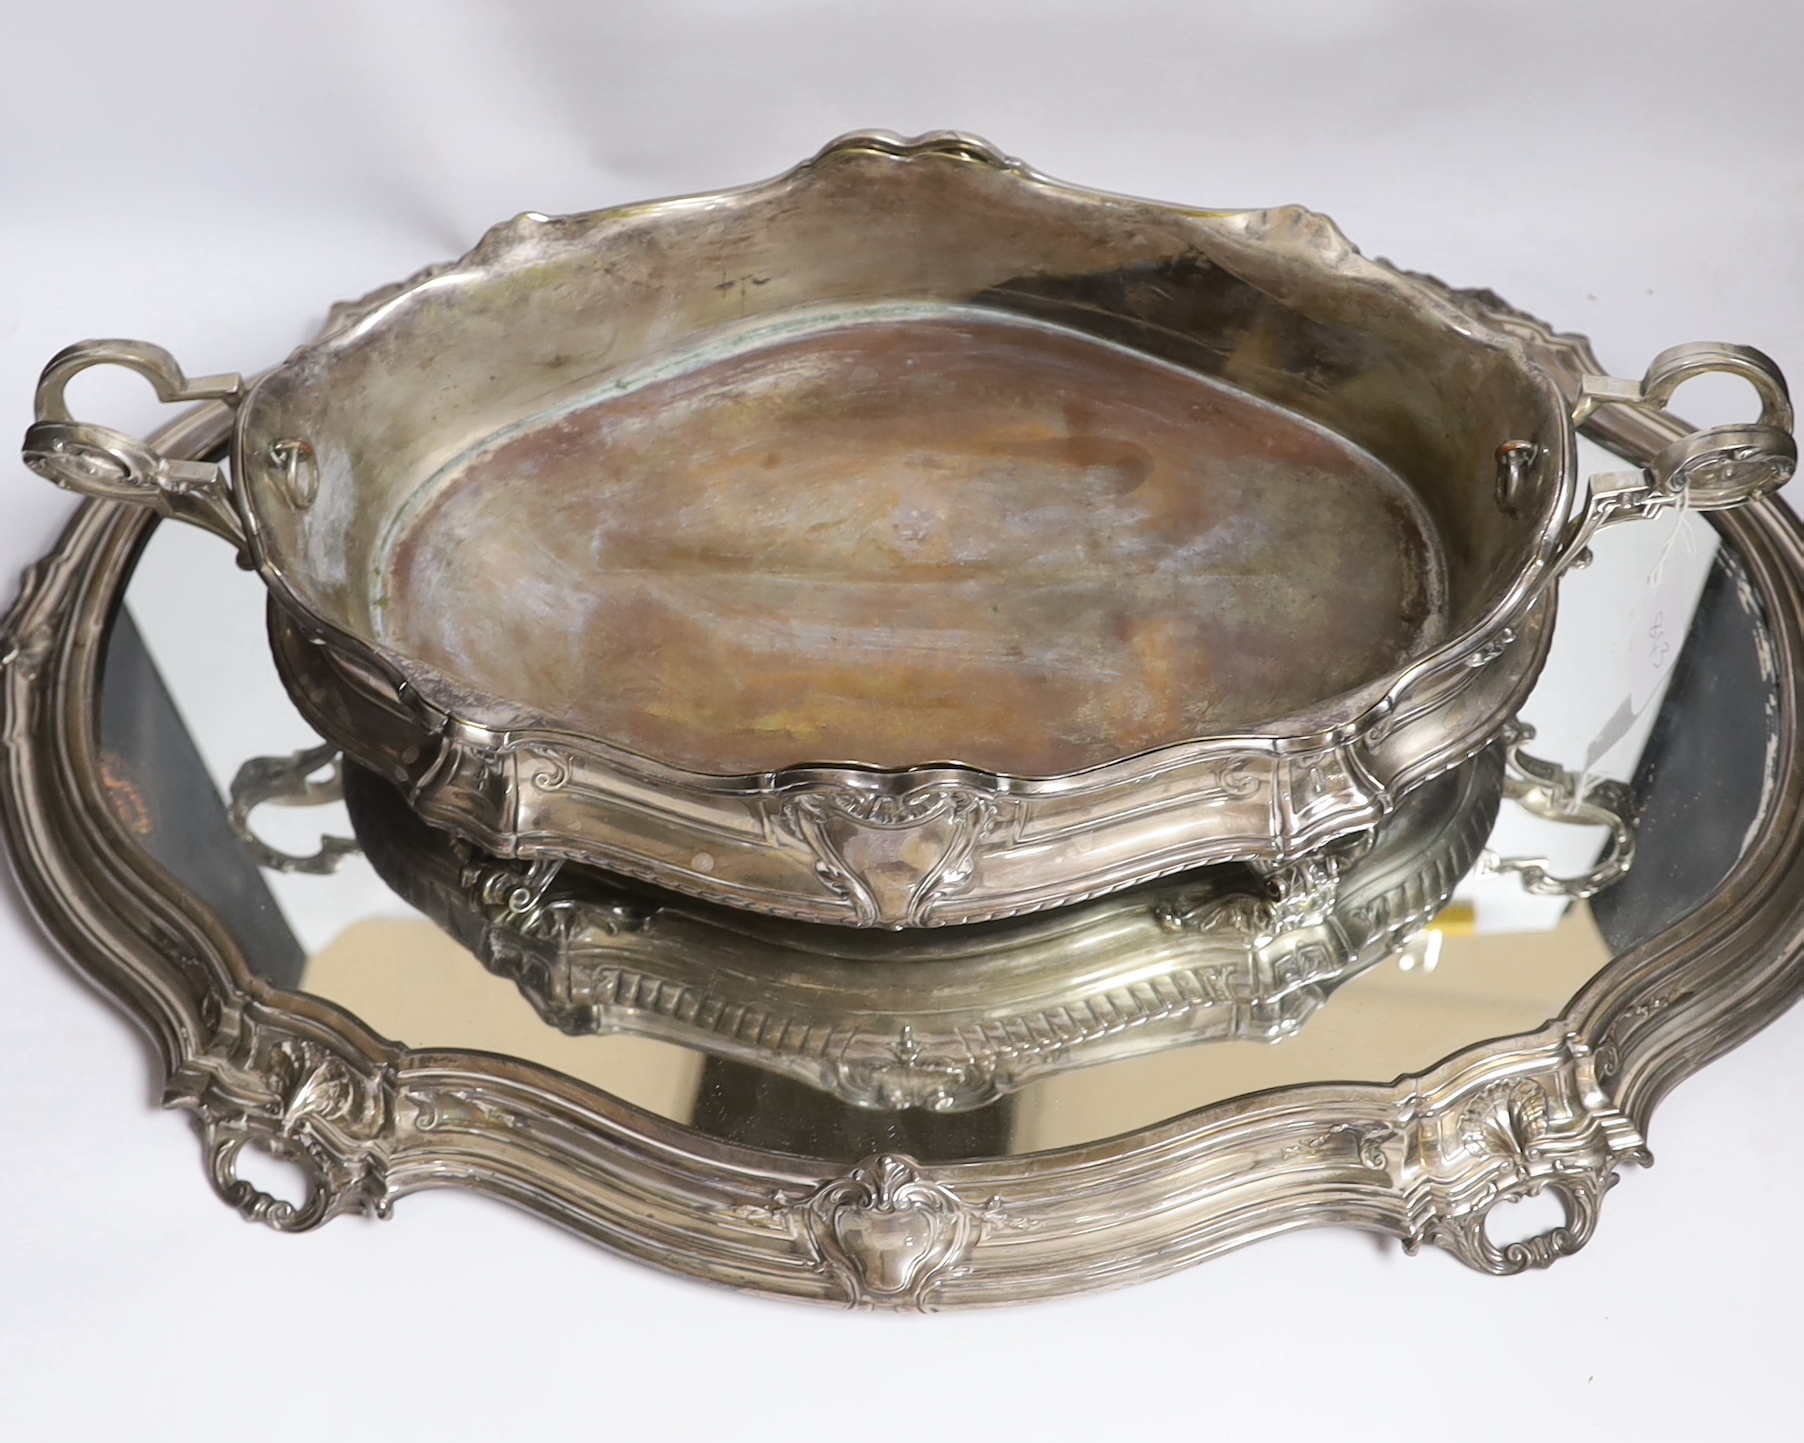 A large ornate Belgian? 800 standard white metal two handled oval centrepiece, 53cm, 46.1oz, with a base metal liner, on a similar 800 standard white metal mounted mirrored stand, 70cm.